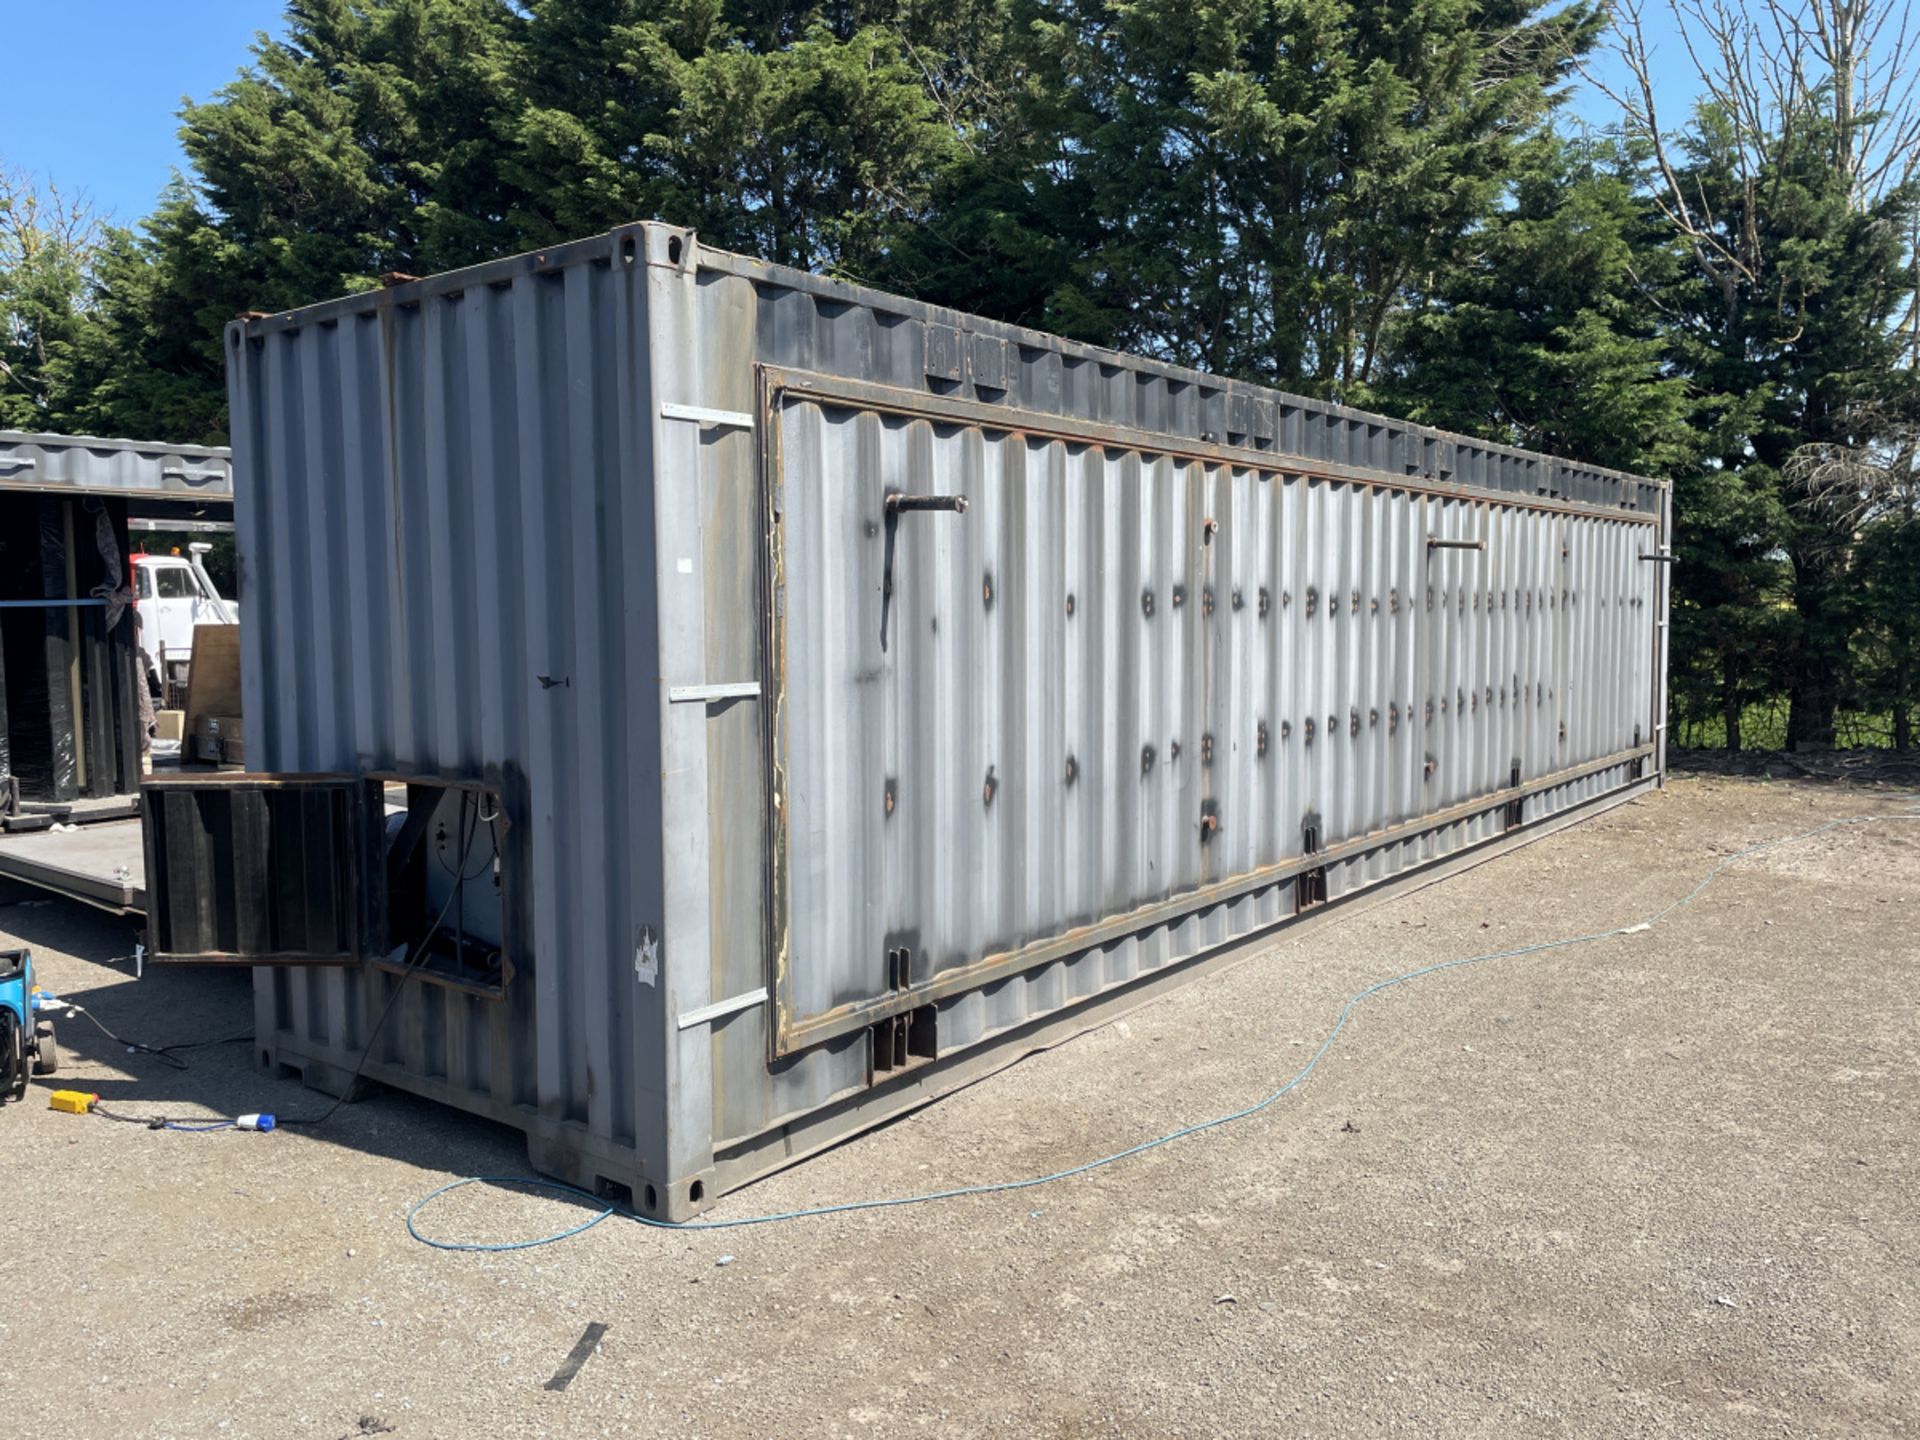 2 x bespoke manufactured 40ft high cube containers that previously formed an event space - Bild 27 aus 42